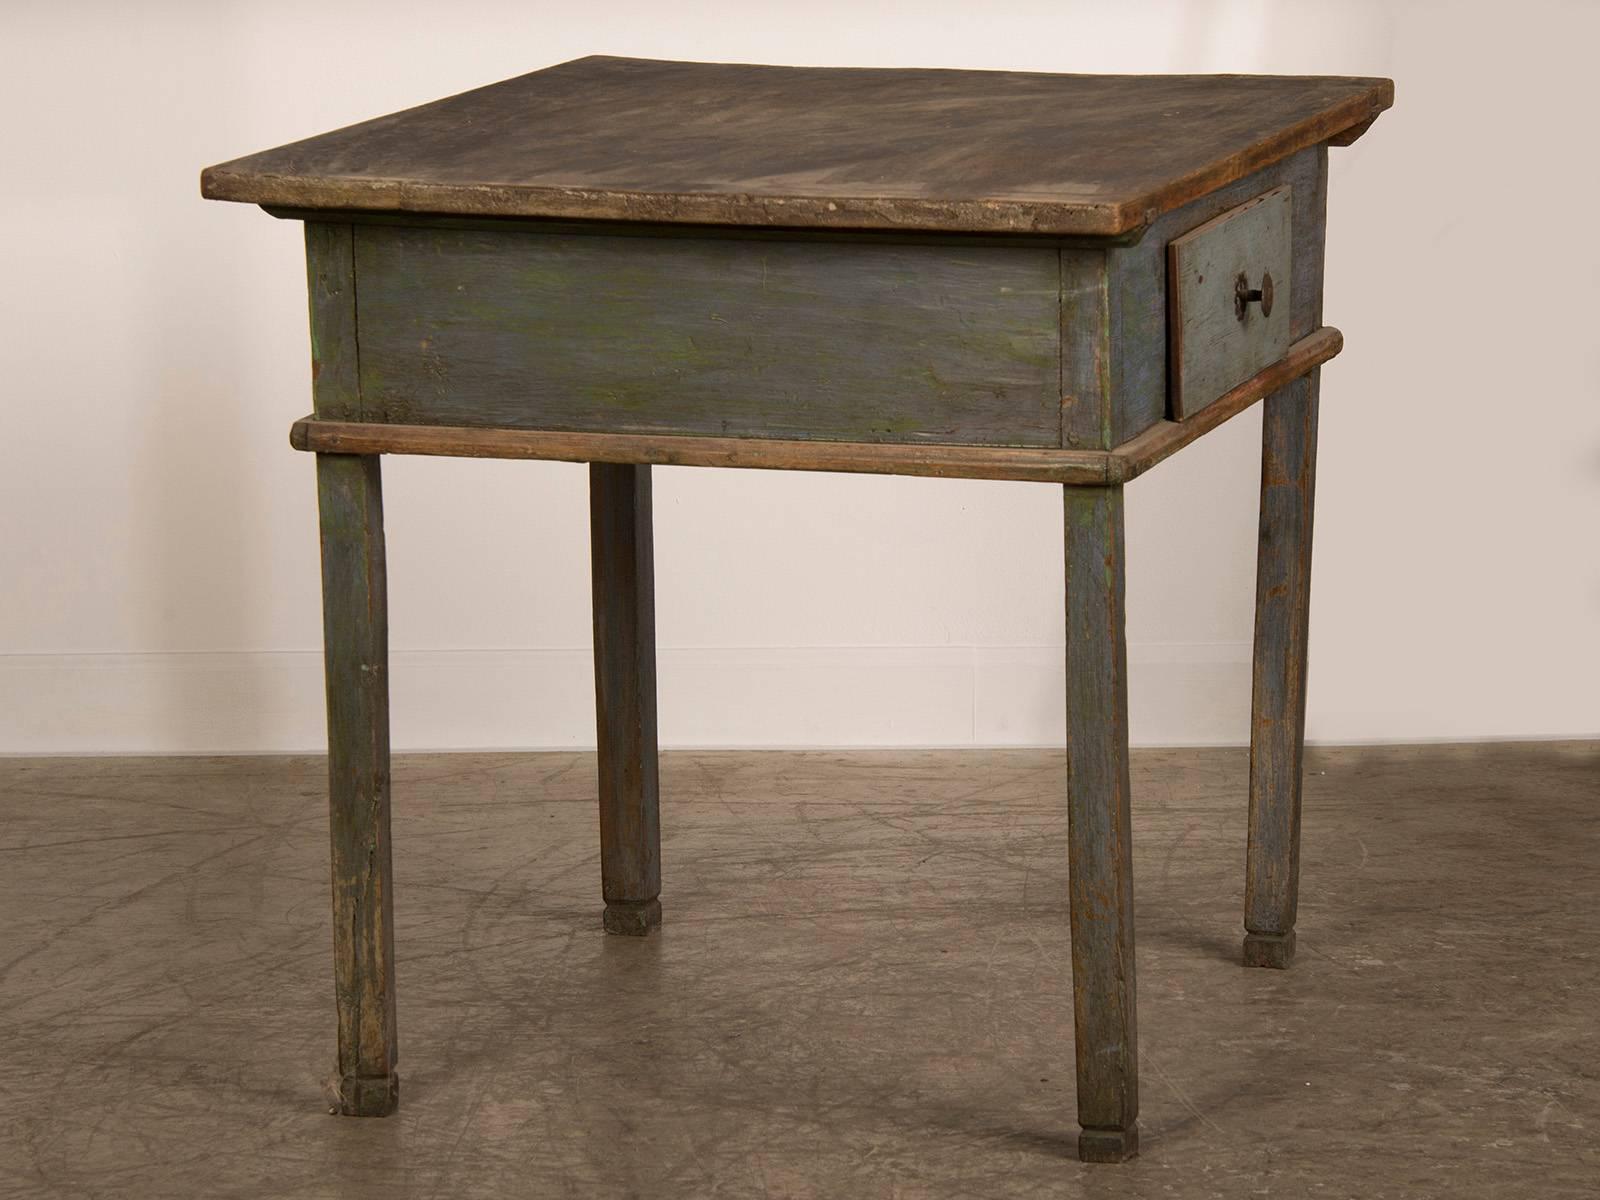 Wood Antique Rustic German Painted Workbench or Writing Table, circa 1790 For Sale